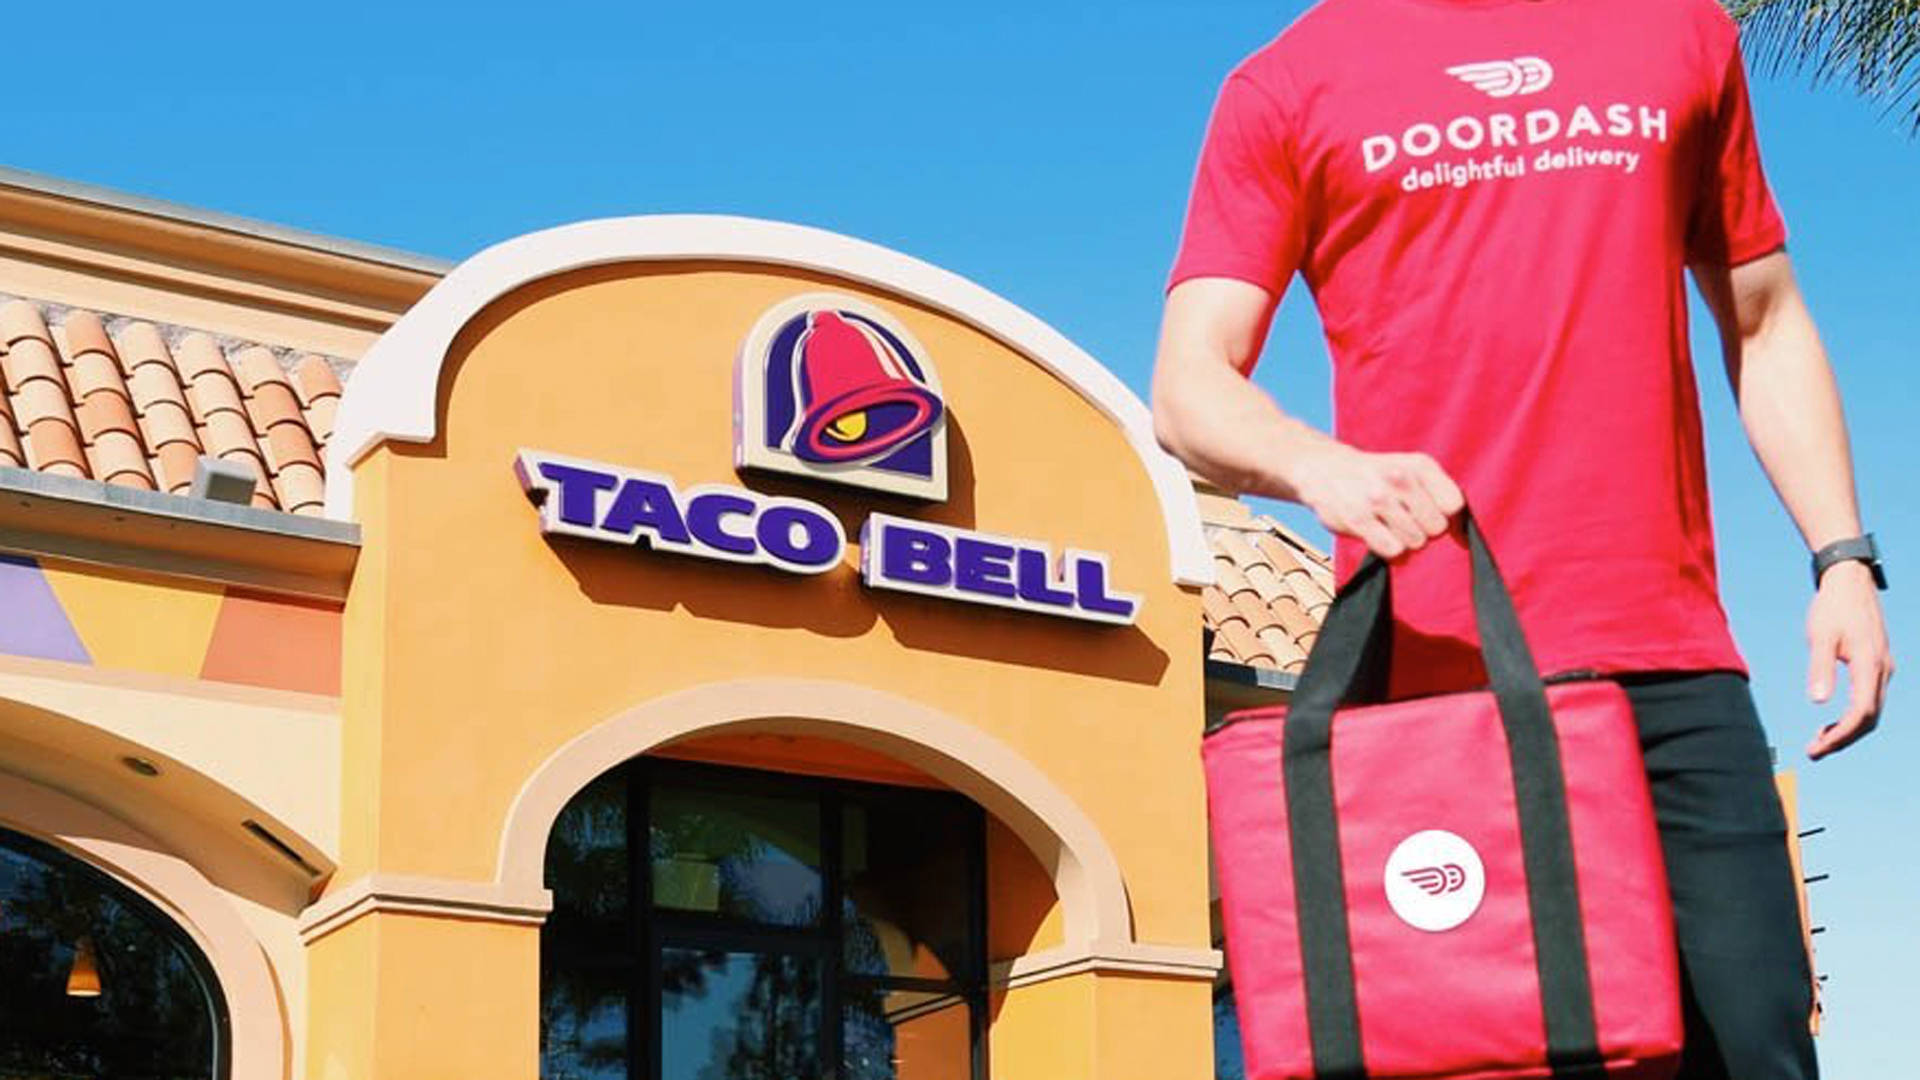 Taco Bell And Door Dash Delivery Background